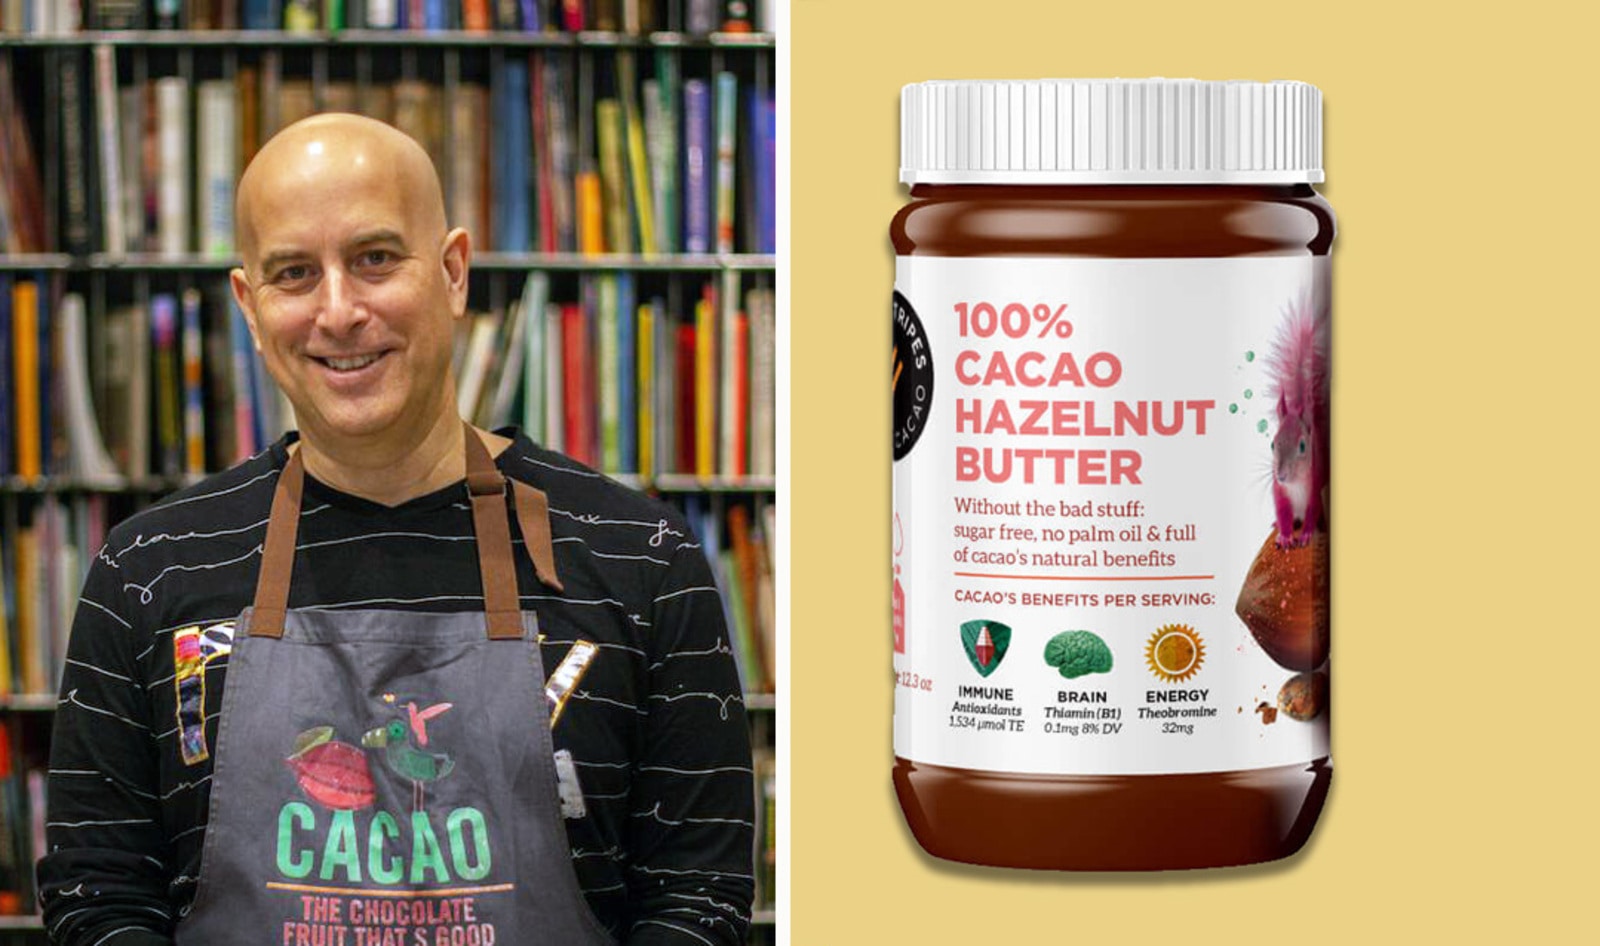 Famed NYC Chocolatier Launches Vegan Nutella